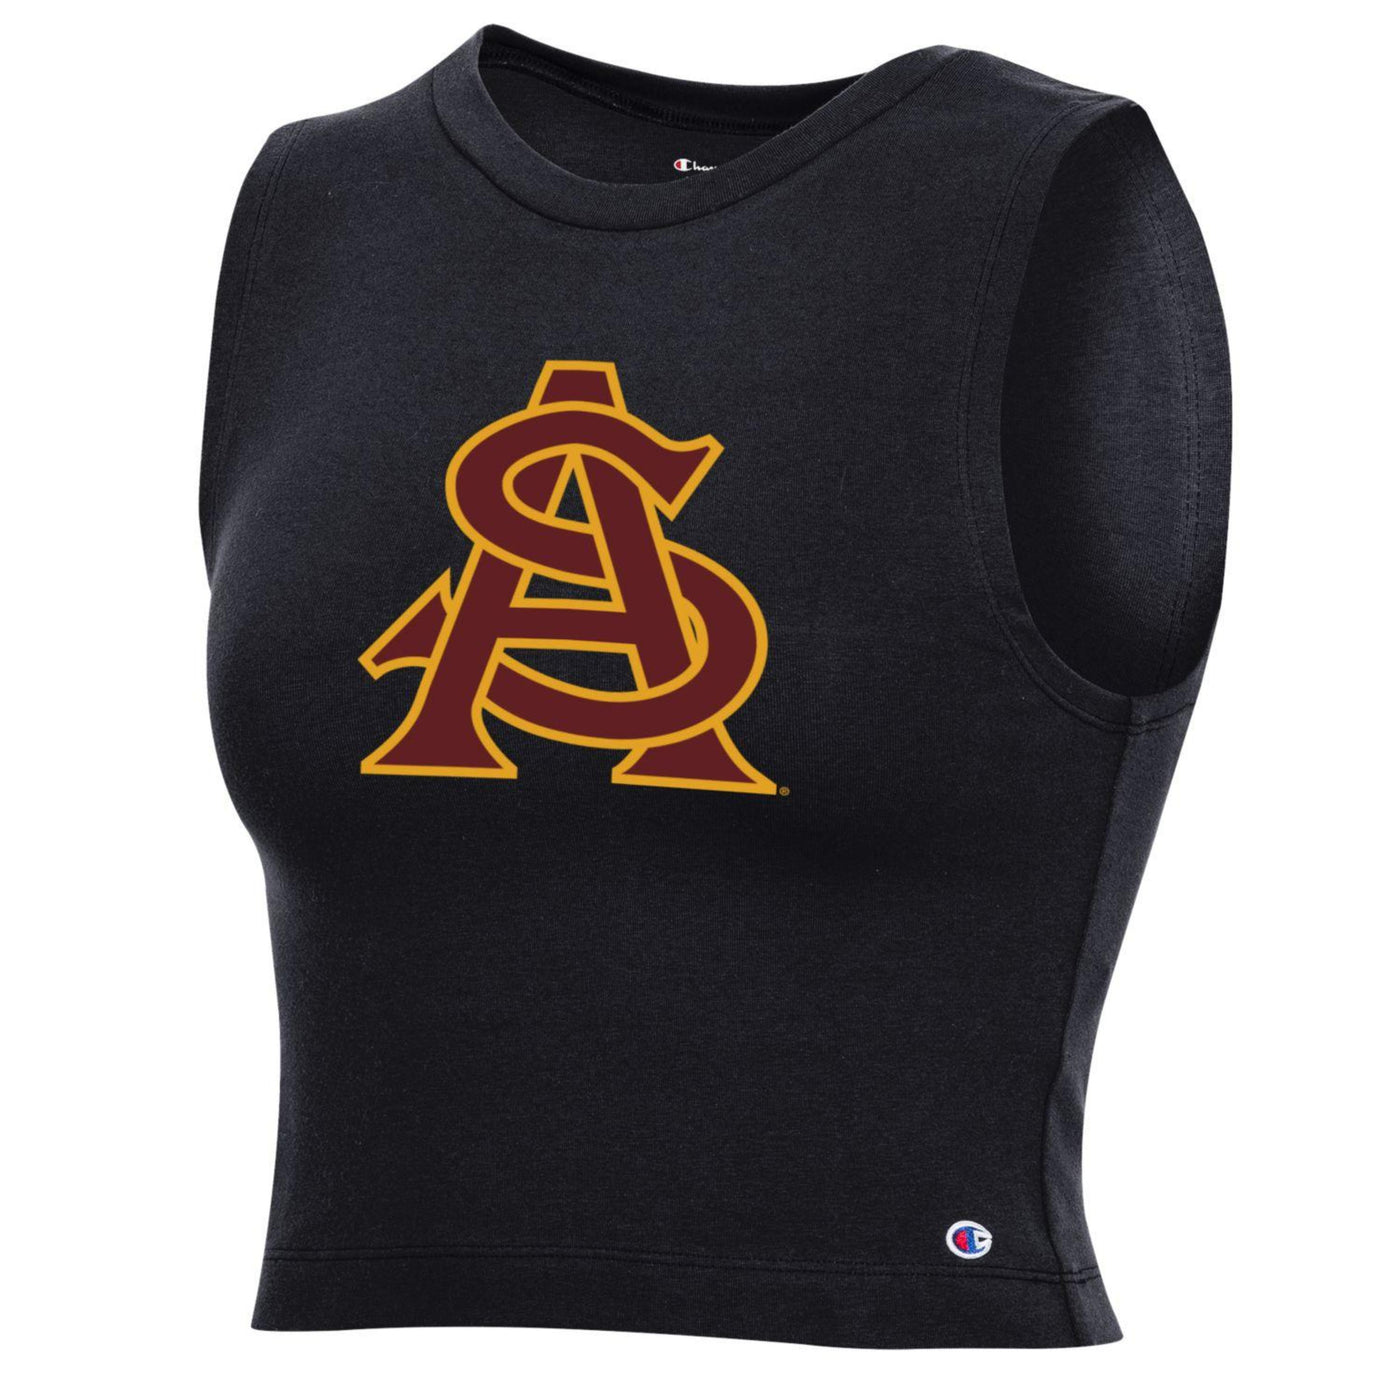 ASU black cropped womens tank with the interlocking A&S logo in maroon outlined in gold on the front.